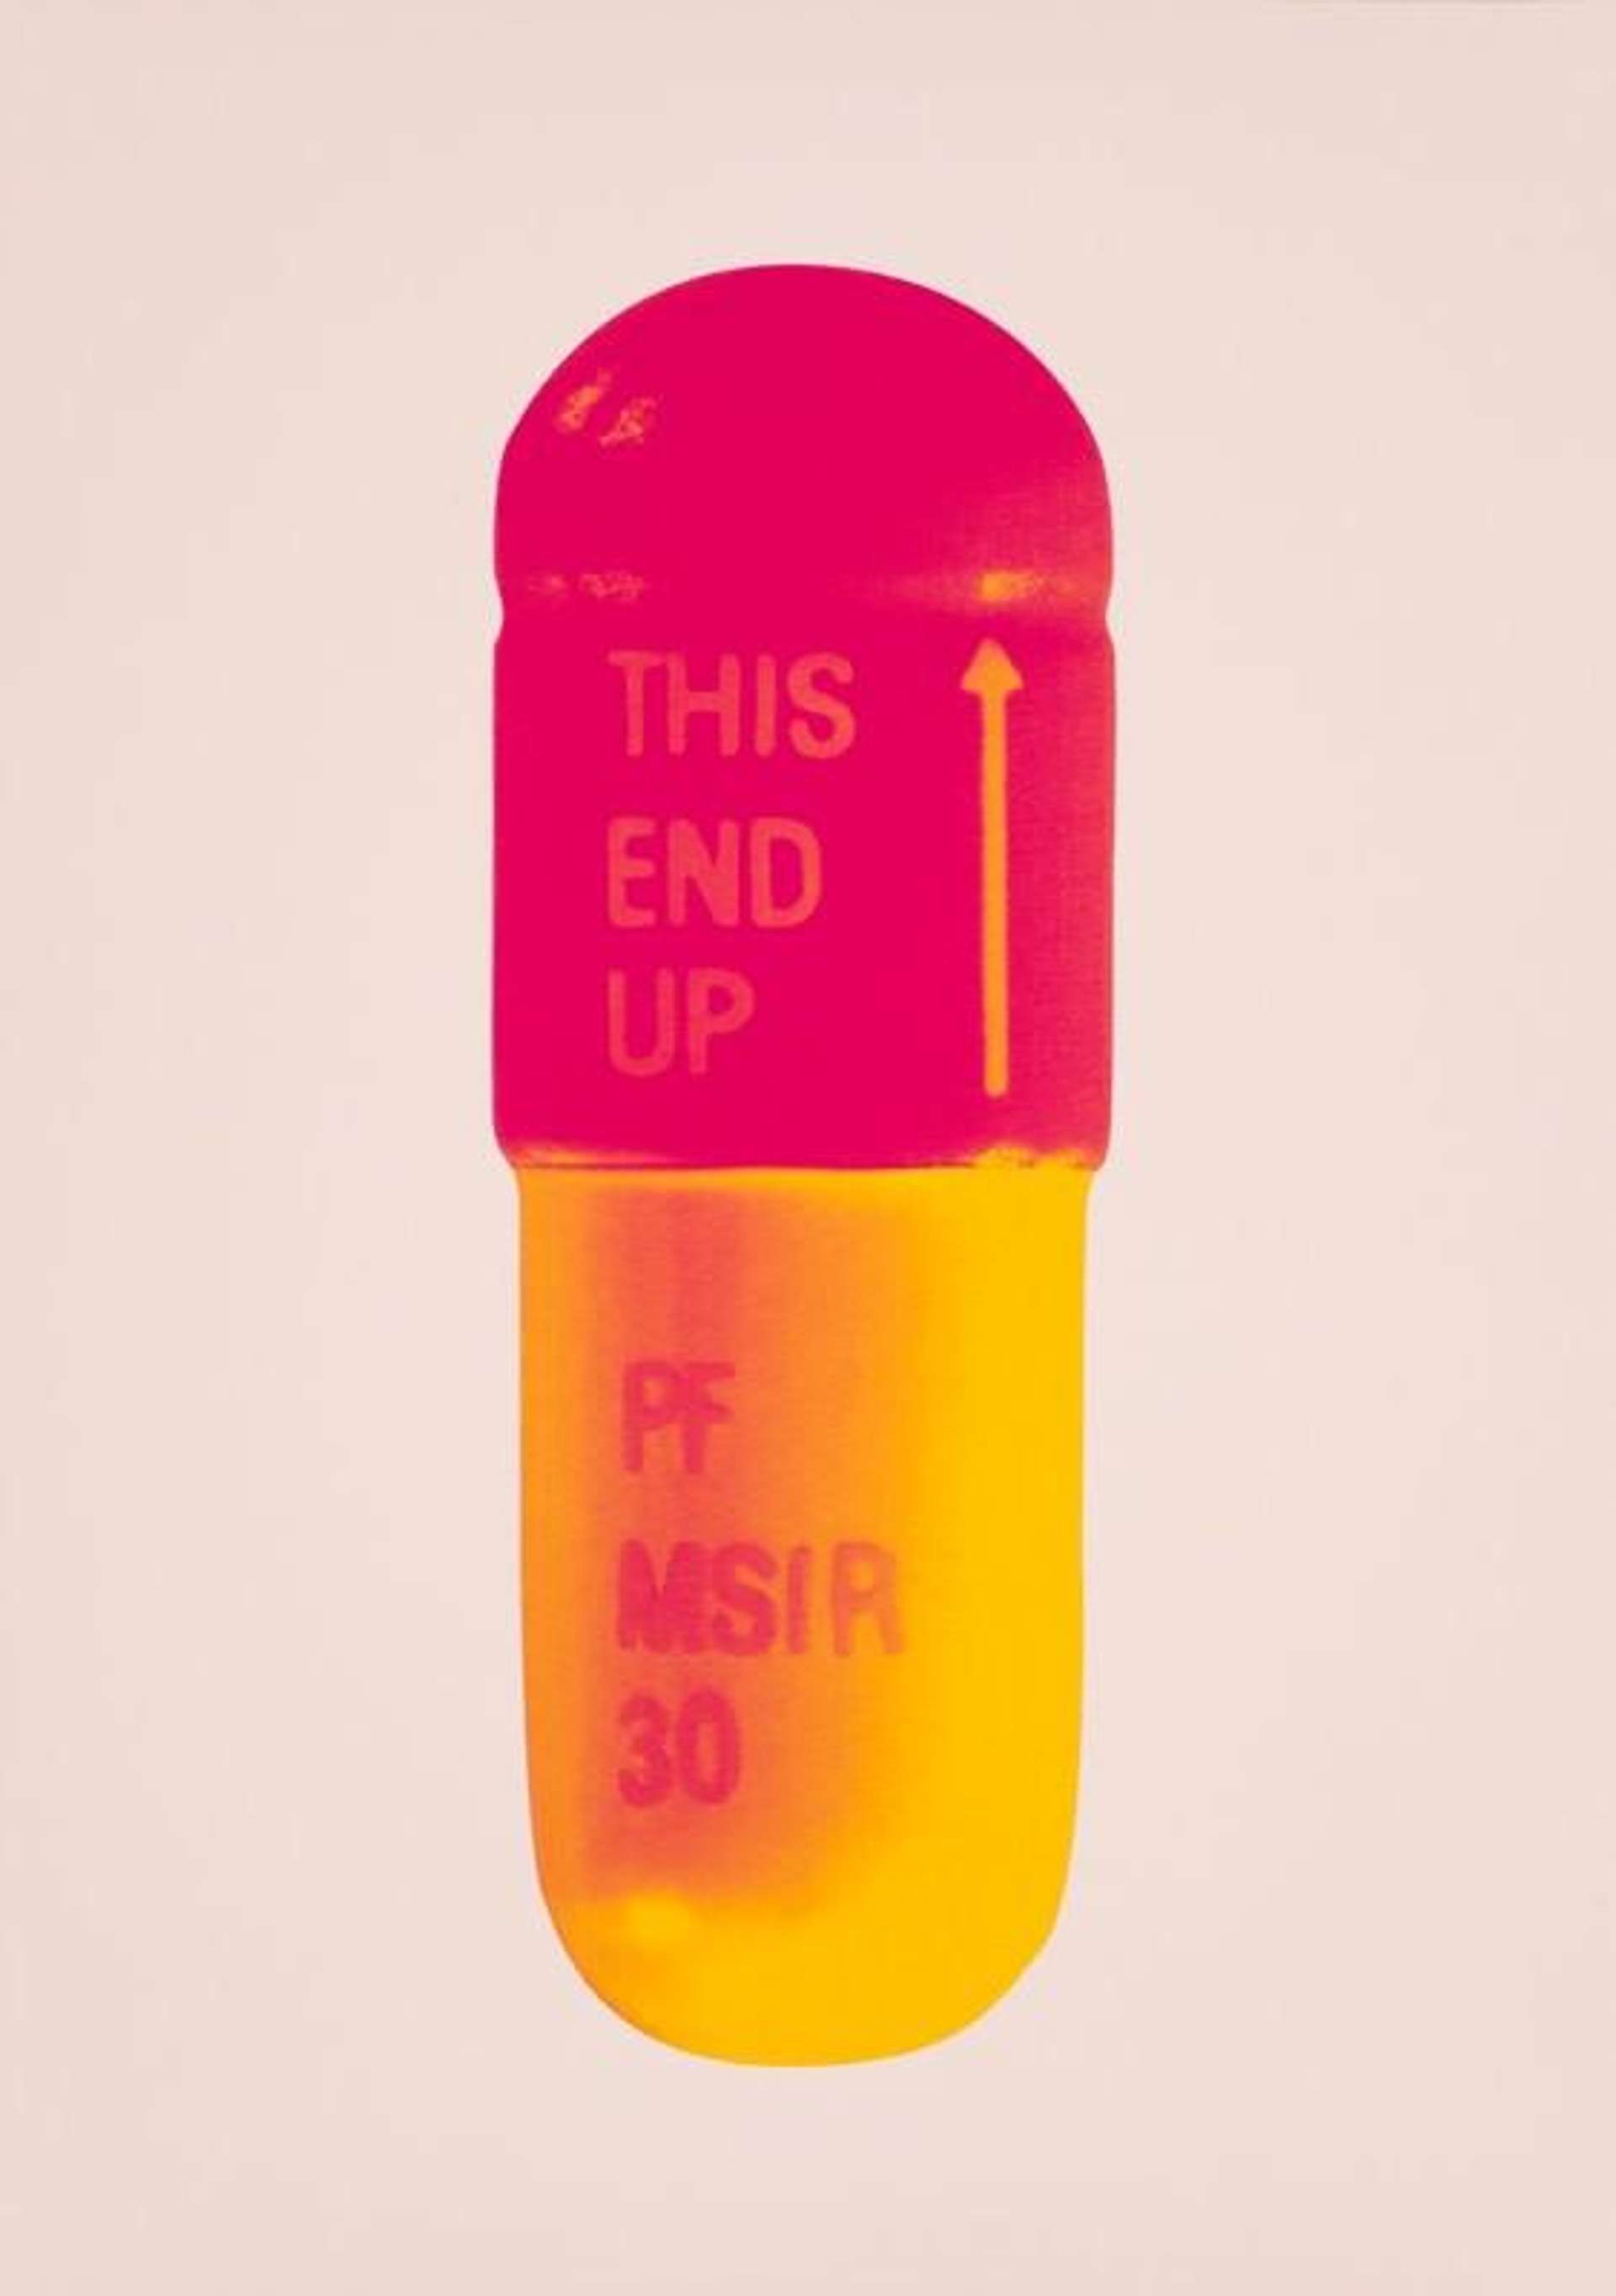 Damien Hirst’s The Cure (powder pink, lollypop red, golden yellow). A screenprint of a pink and yellow pharmaceutical pill against a light pink background.